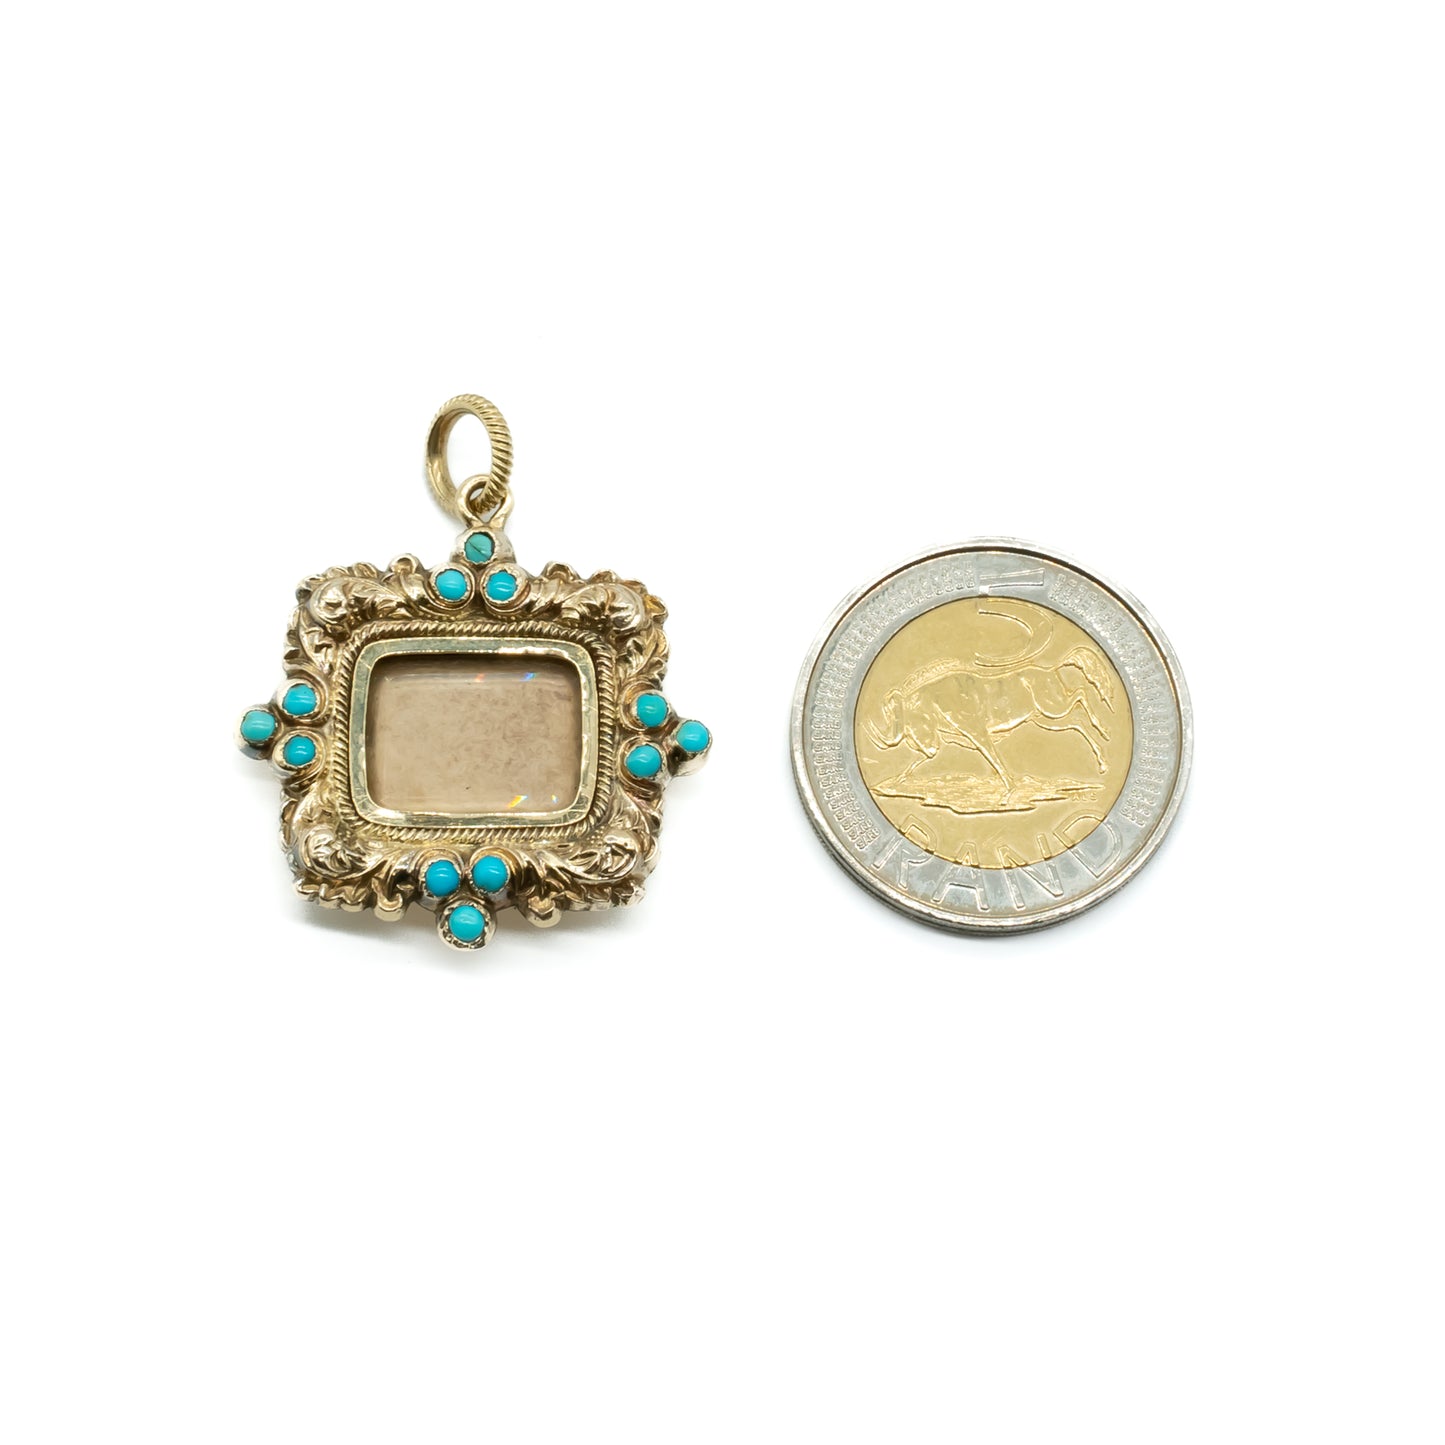 Exquisite Georgian 9ct gold cased mourning pendant set with 12 small round turquoise stones. Rectangular piece of glass in centre - ideal for photo.